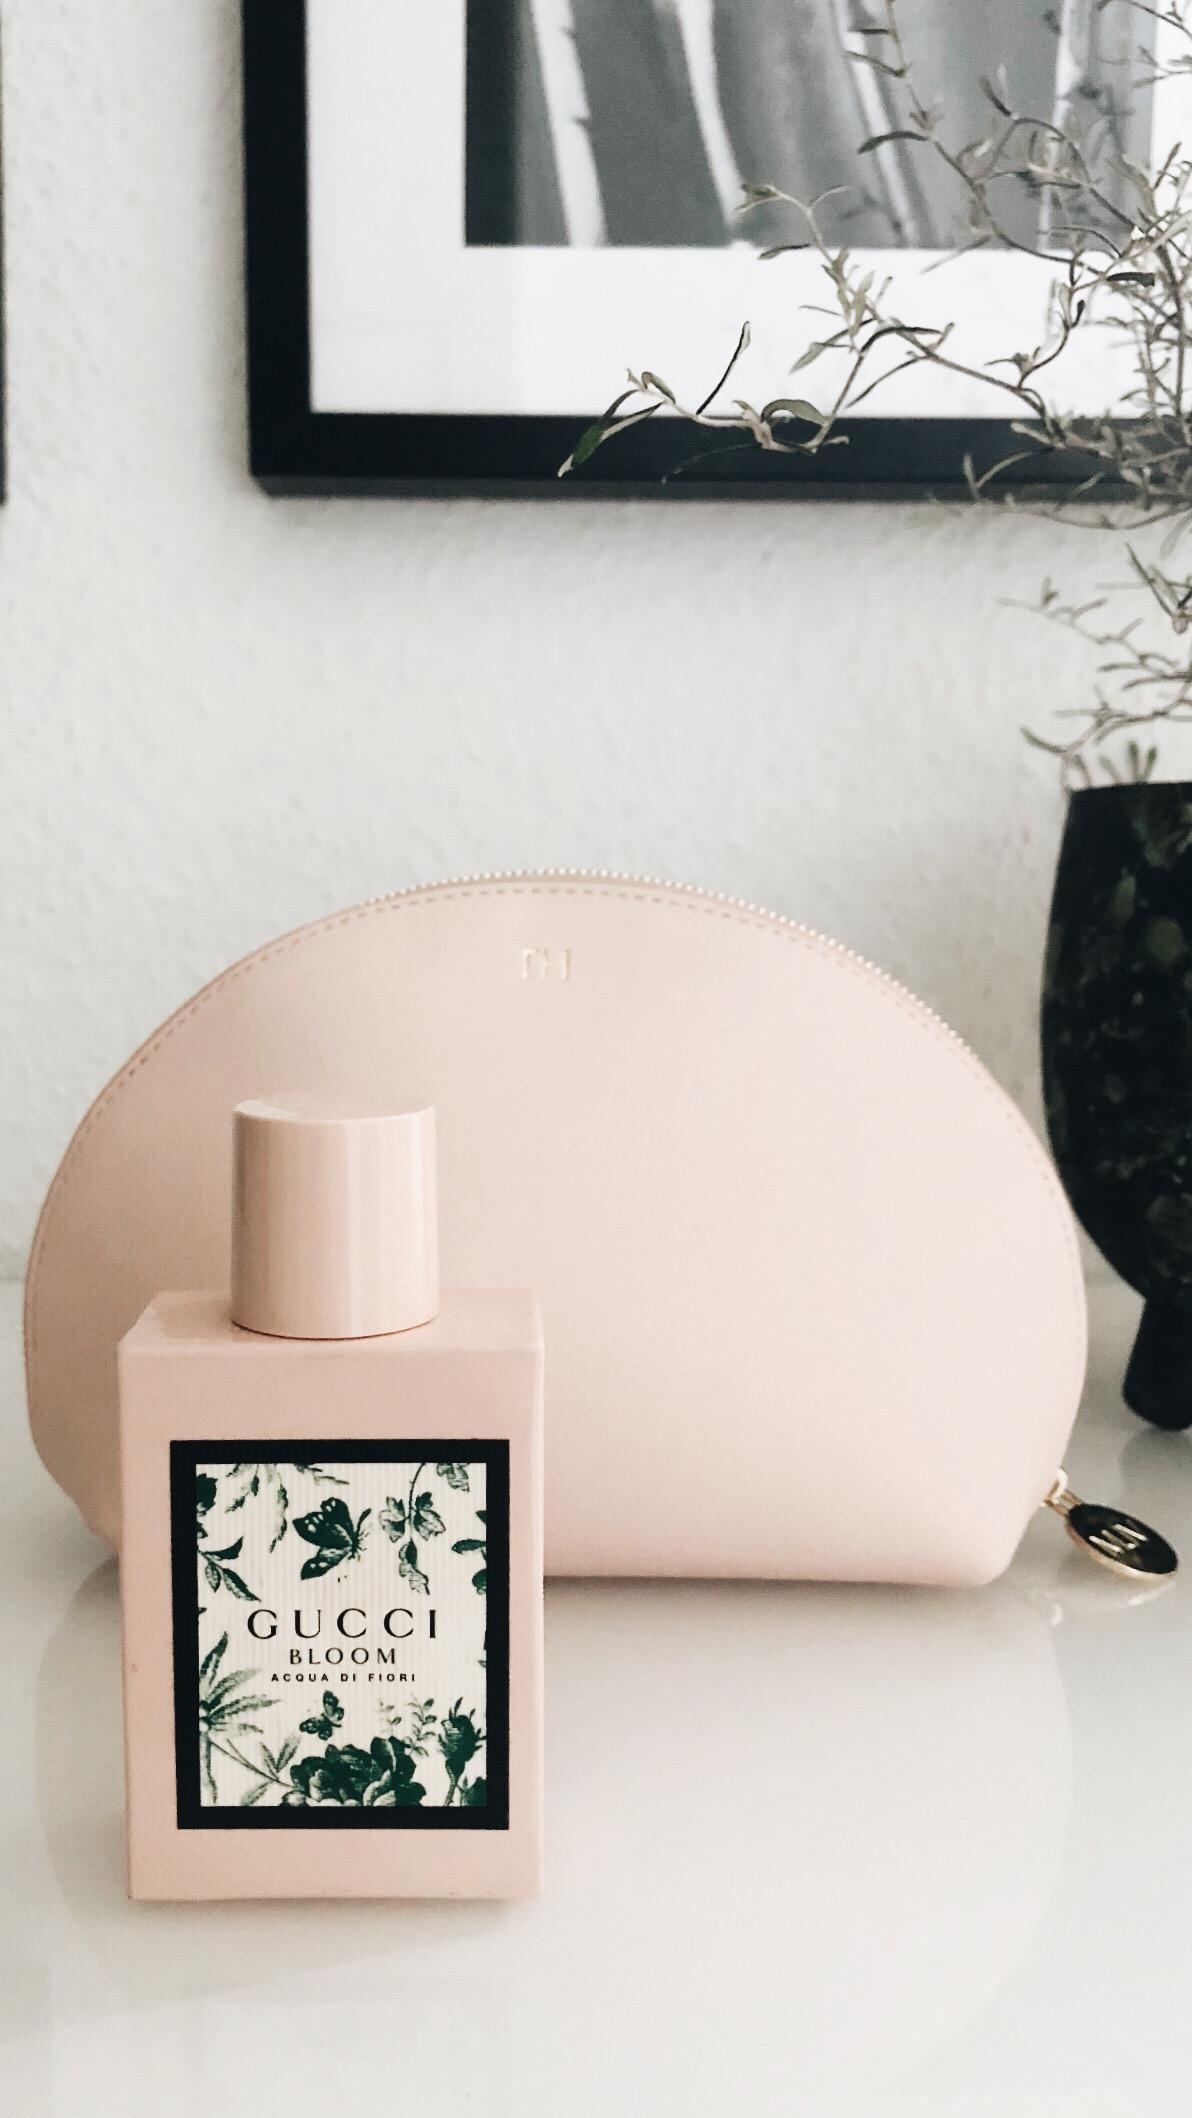 Aktuell mein #liebling #parfum #couchstyle #rose #essentials #guccibloom #majavia #cosmetics #beauty #inlove